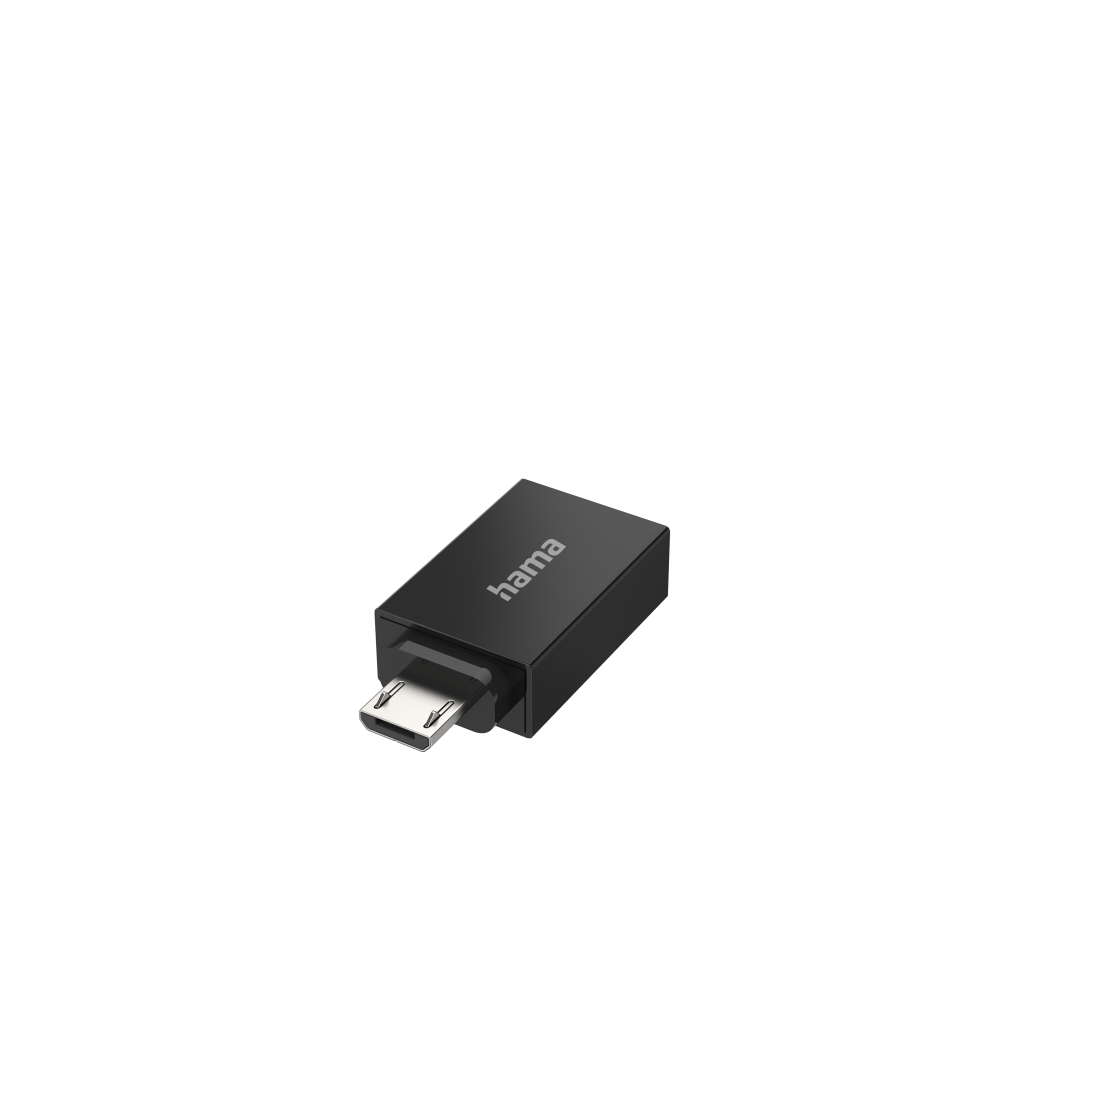 Micro-USB-OTG-Adapter to USB-A USB 2.0 480 Mbps